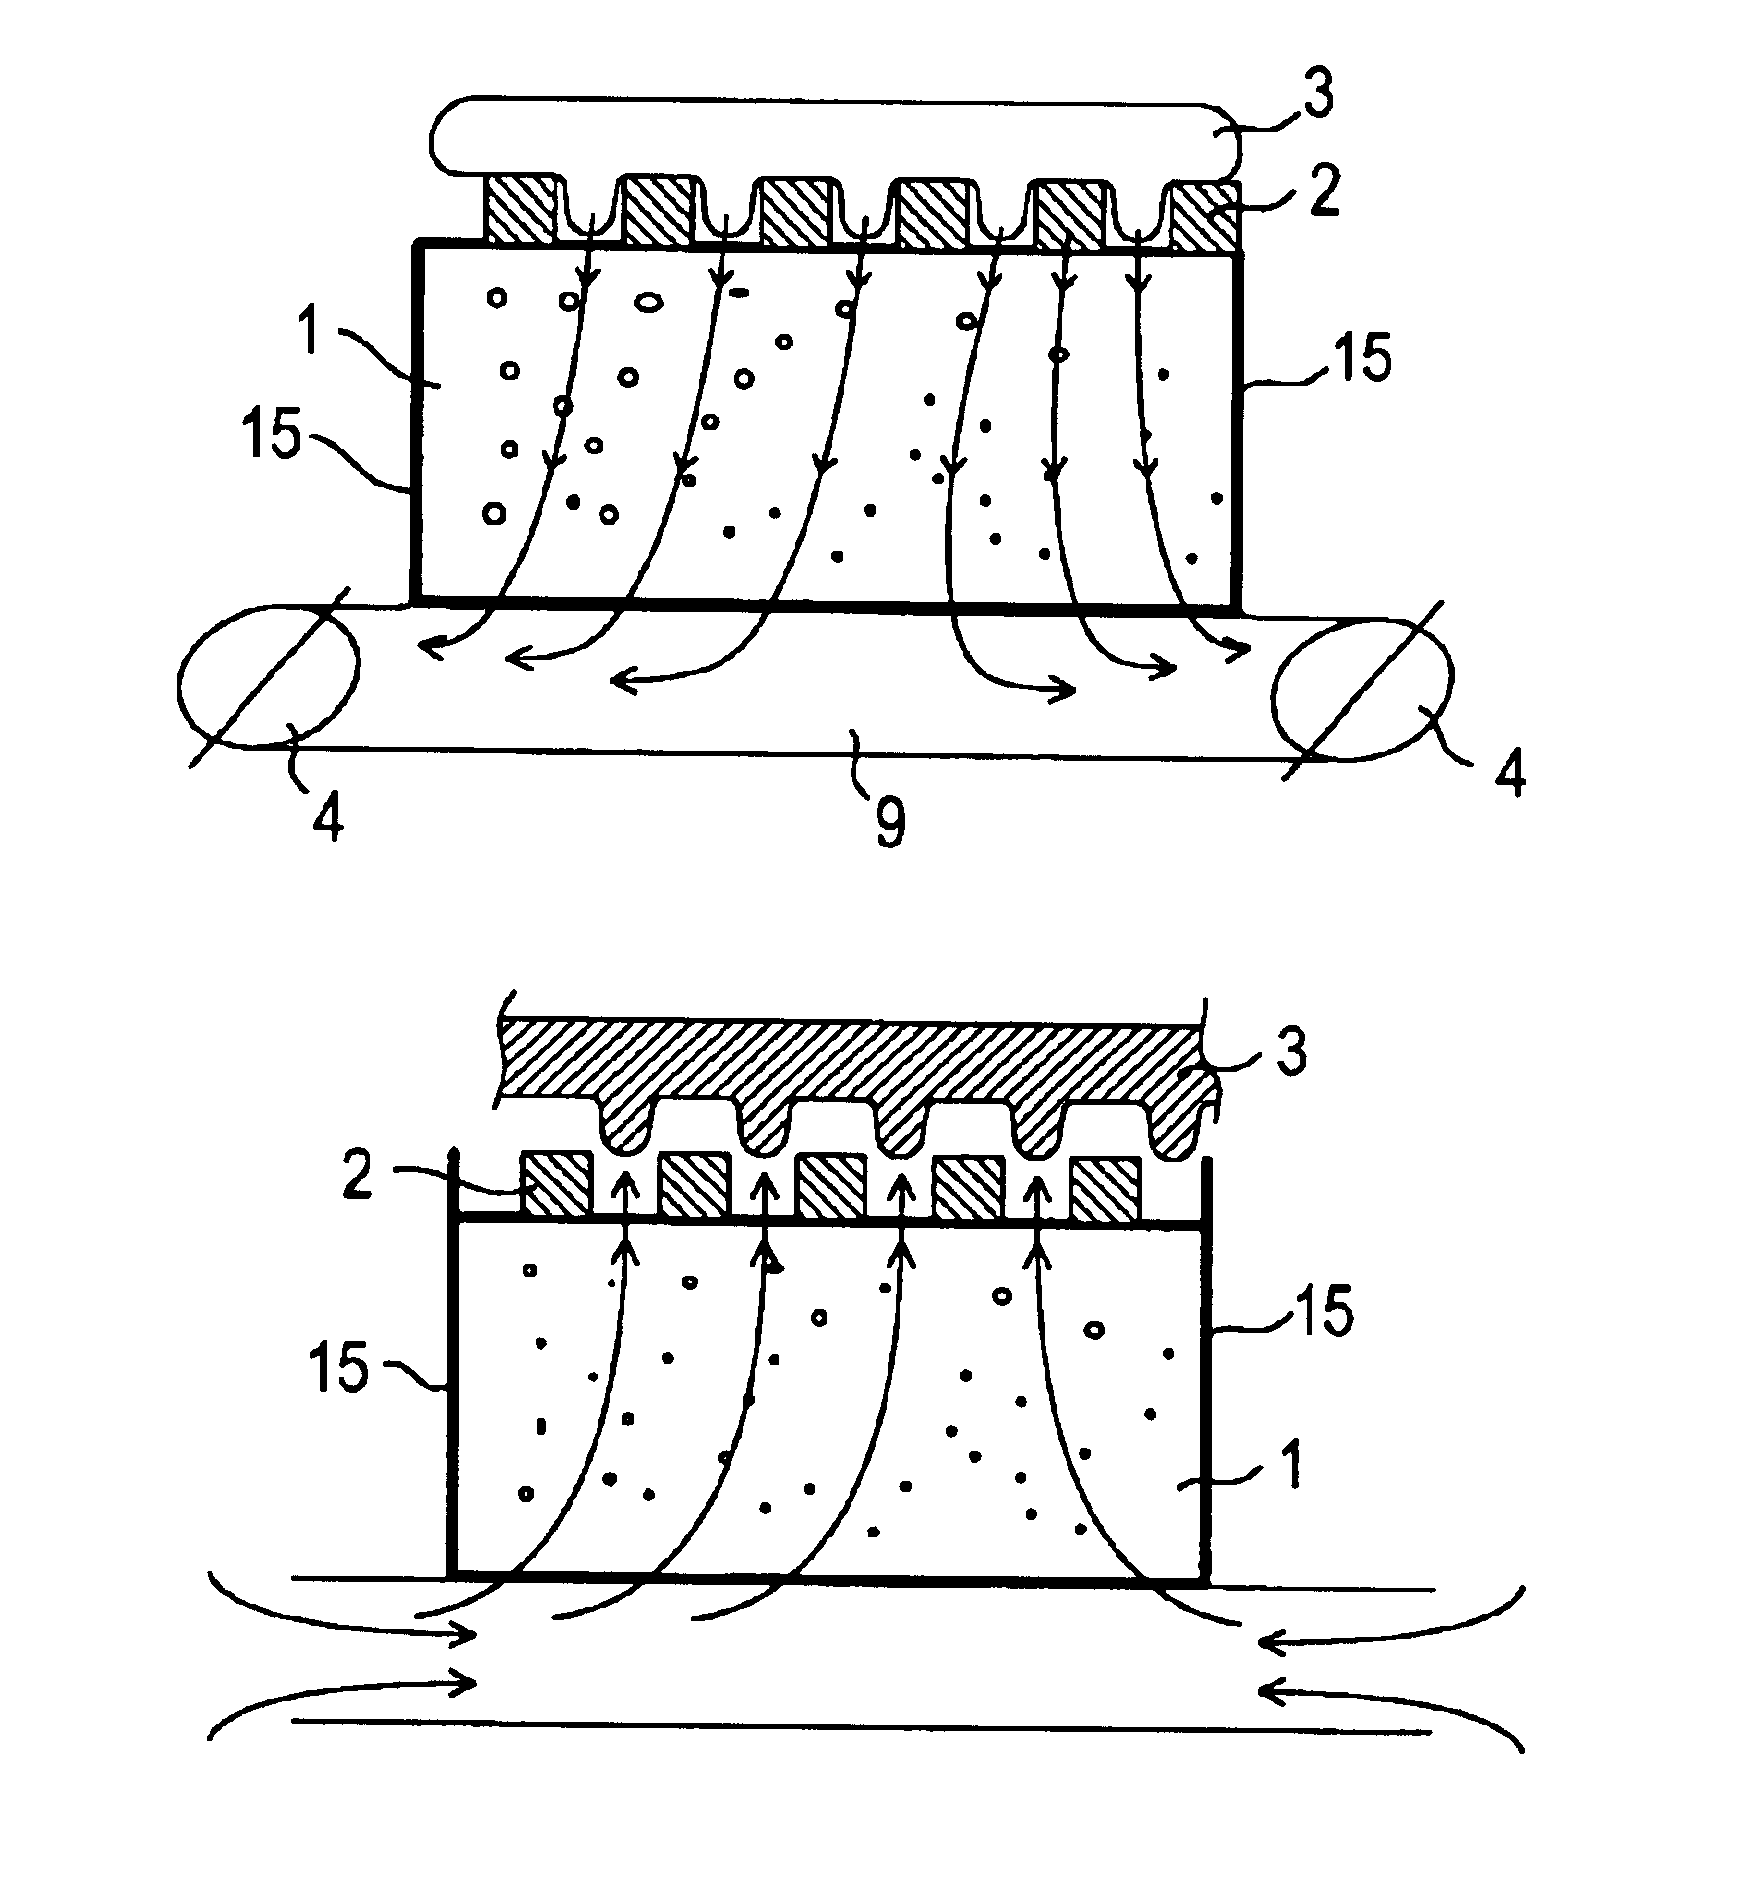 Method for making a microstructure in a glass or plastic substrate according to hot-forming technology and associated forming tool